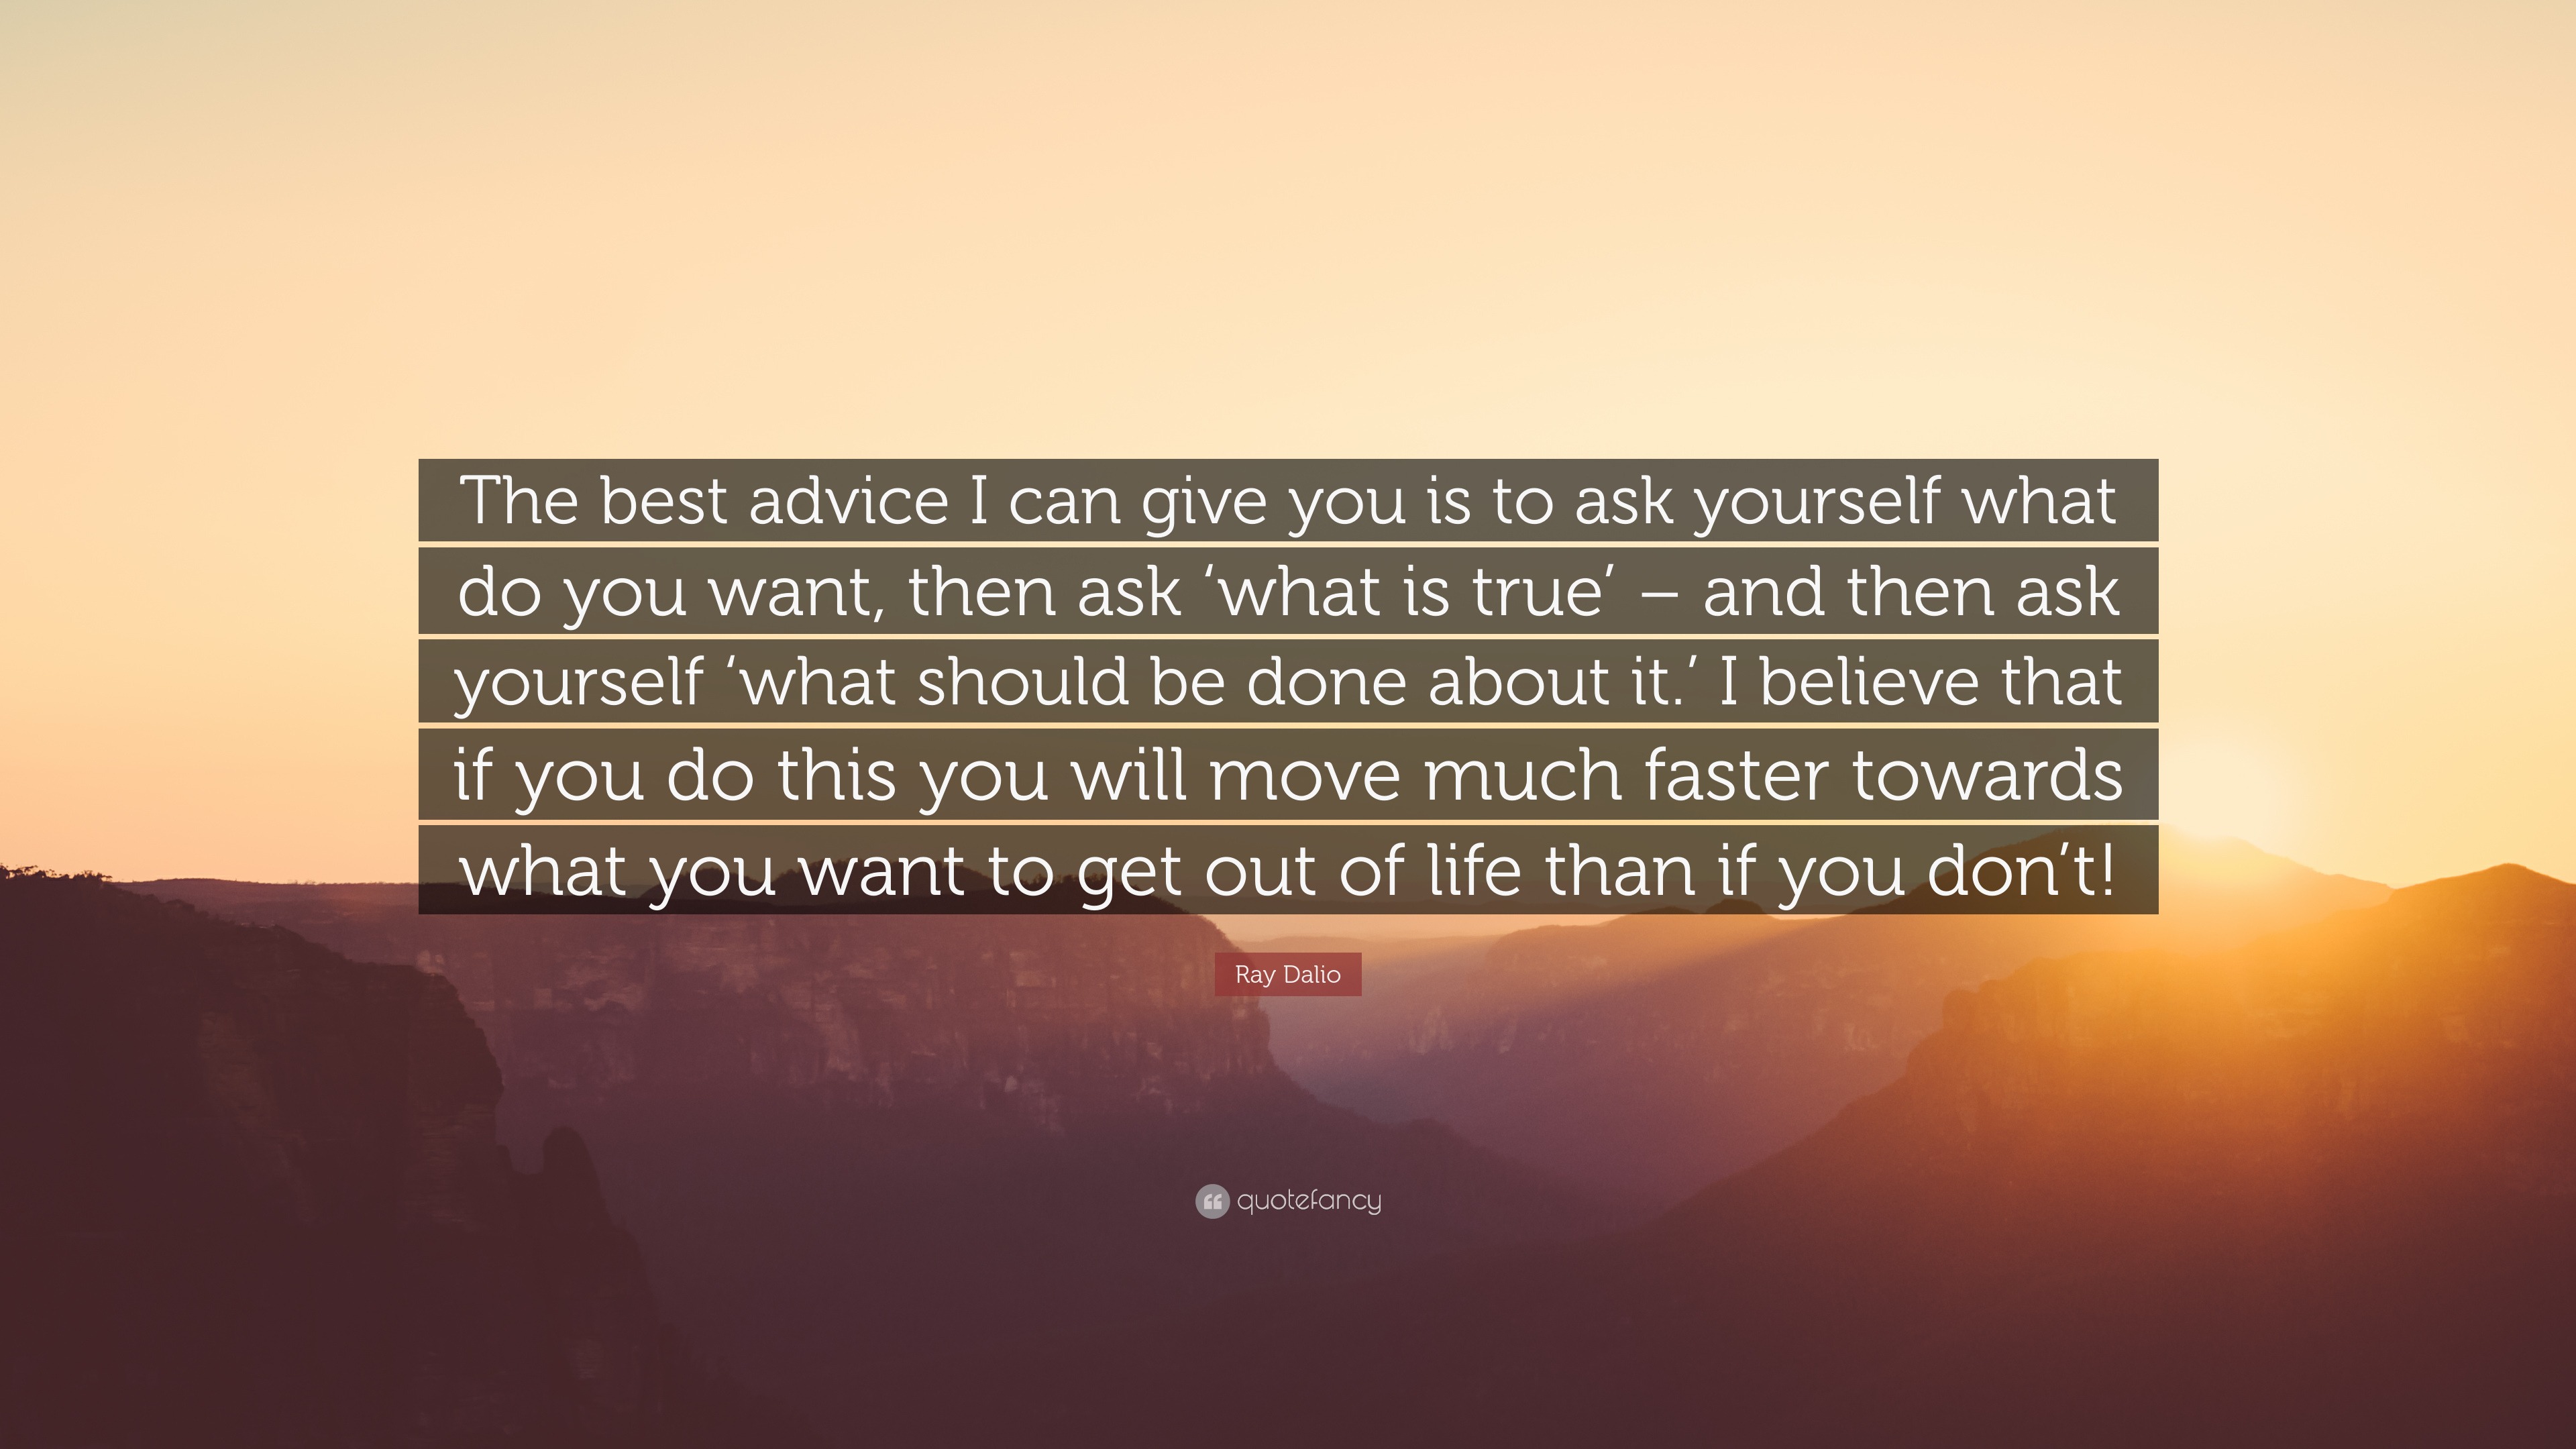 Ray Dalio Quote: “The best advice I can give you is to ask yourself what do  you want, then ask 'what is true' – and then ask yourself 'wha...”